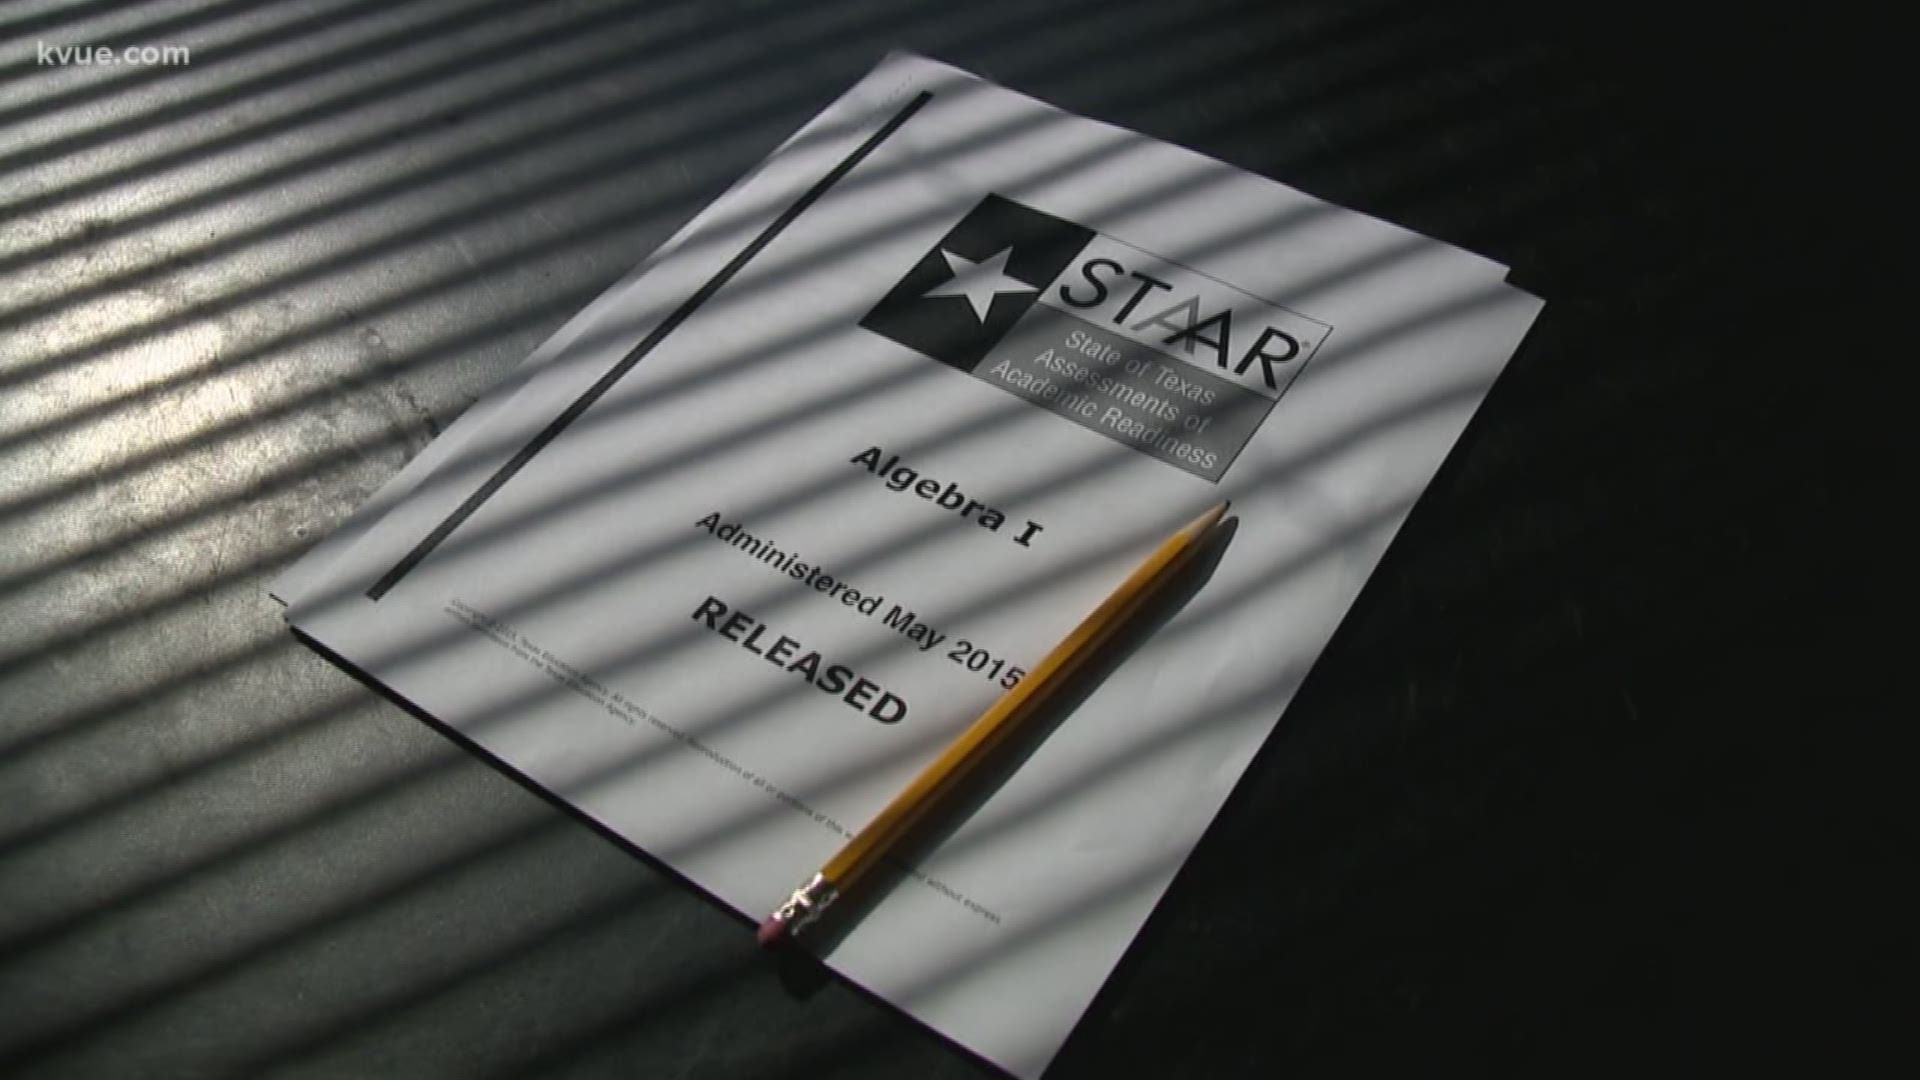 Several technological issues with the STAAR online testing system affected over 100,000 students across the state of Texas Tuesday morning, according to the Texas Education Agency Communications Office.